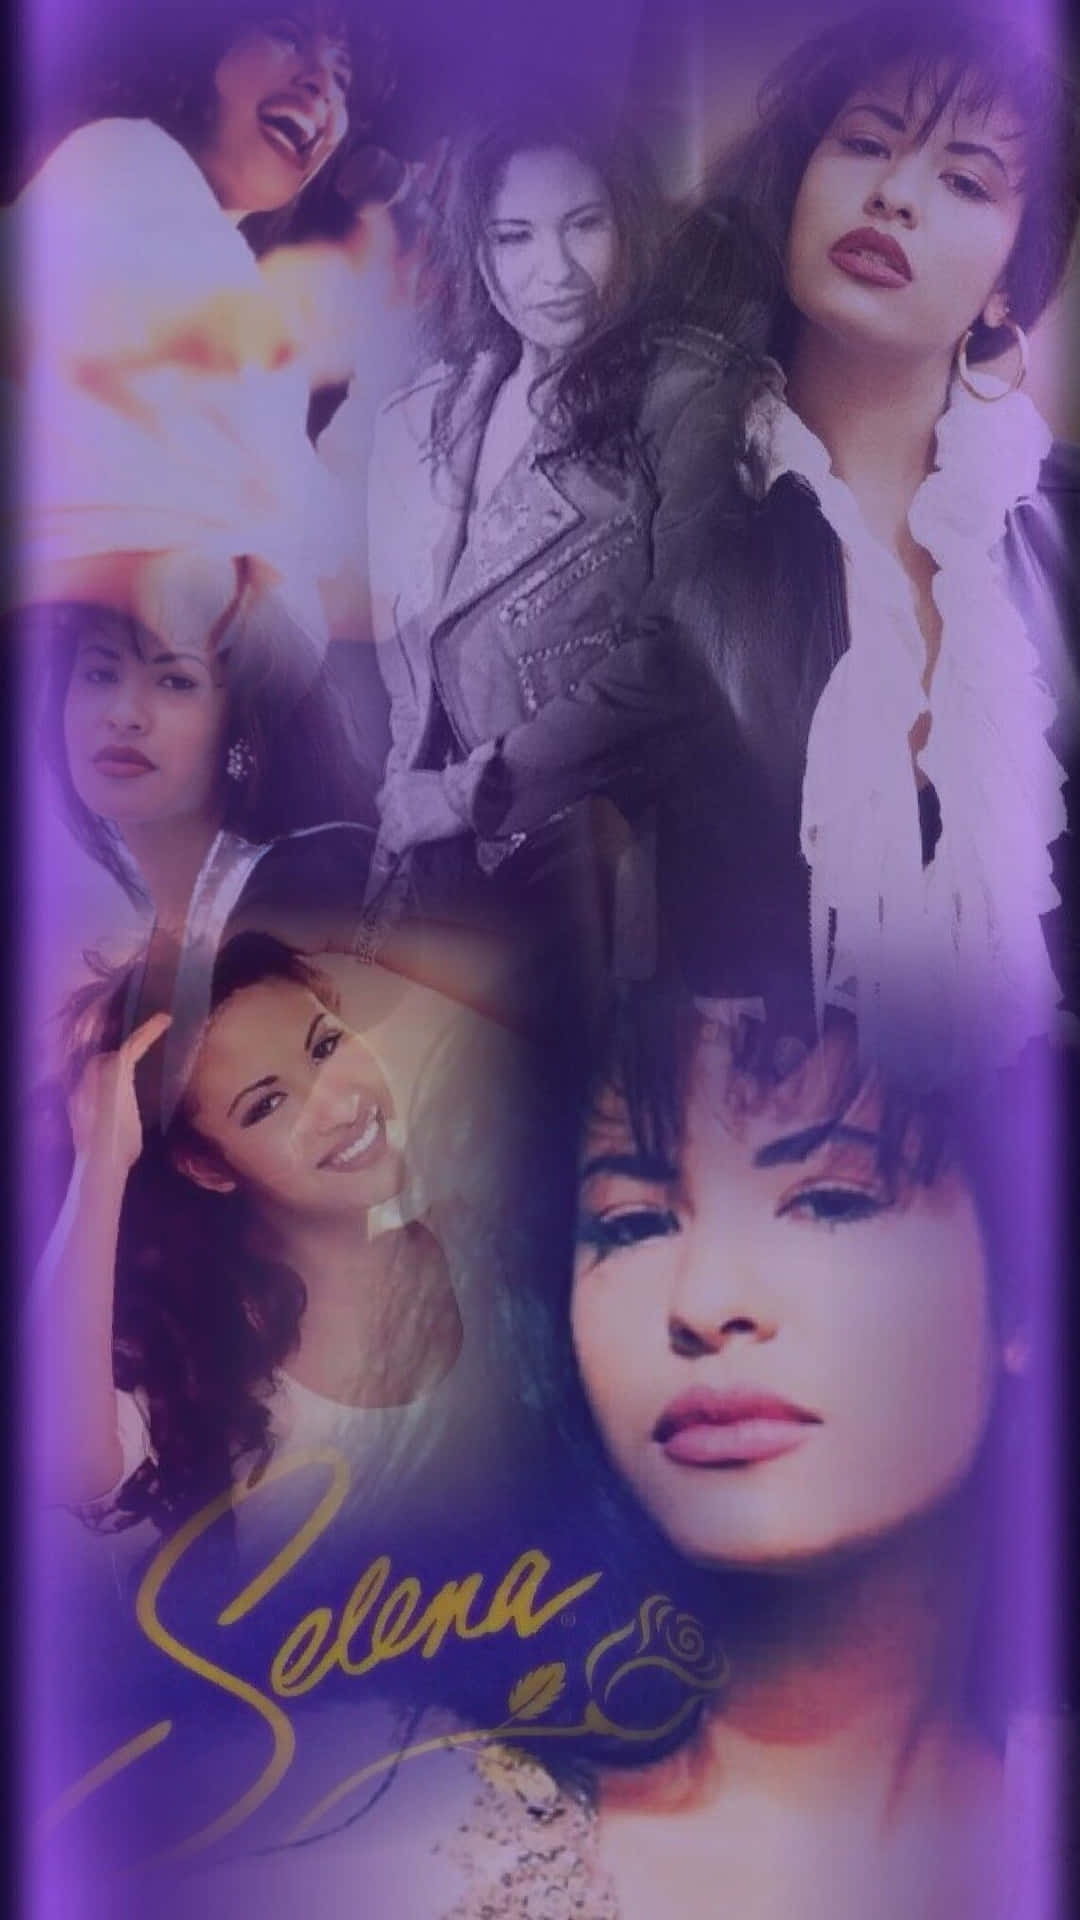 Listen to the Music of the Iconic Selena Quintanilla on Your Iphone Wallpaper